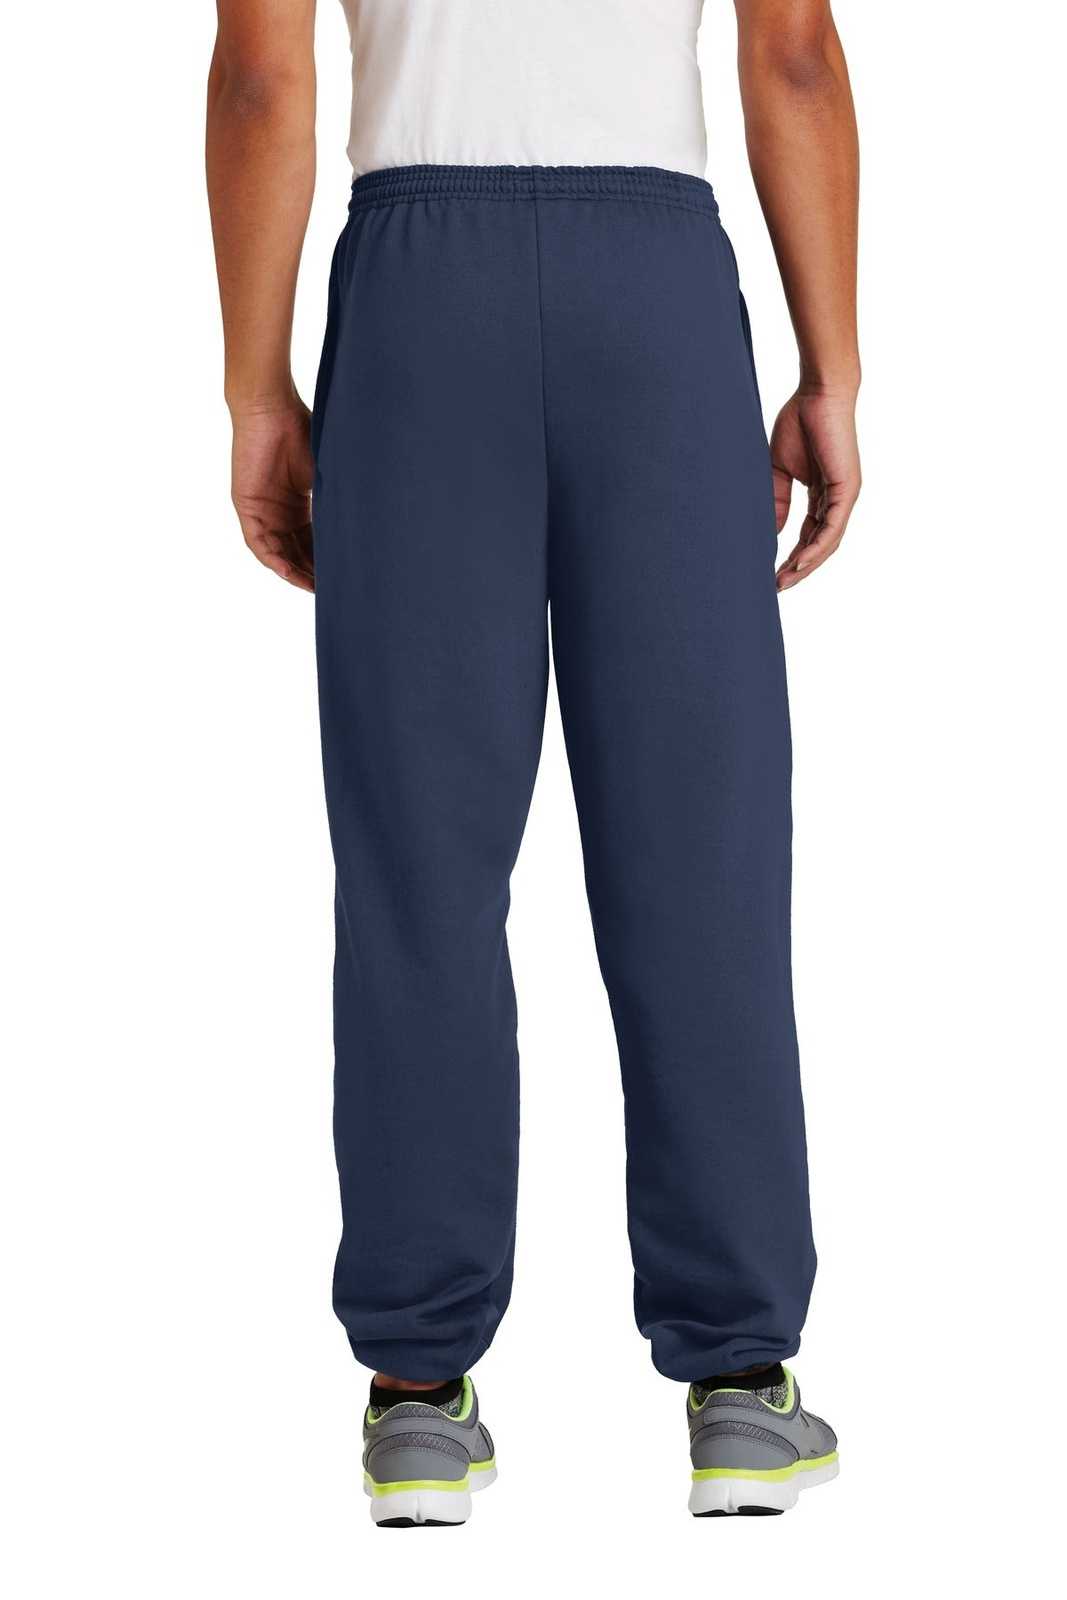 Port & Company PC90P Essential Fleece Sweatpant with Pockets - Navy - HIT a Double - 1